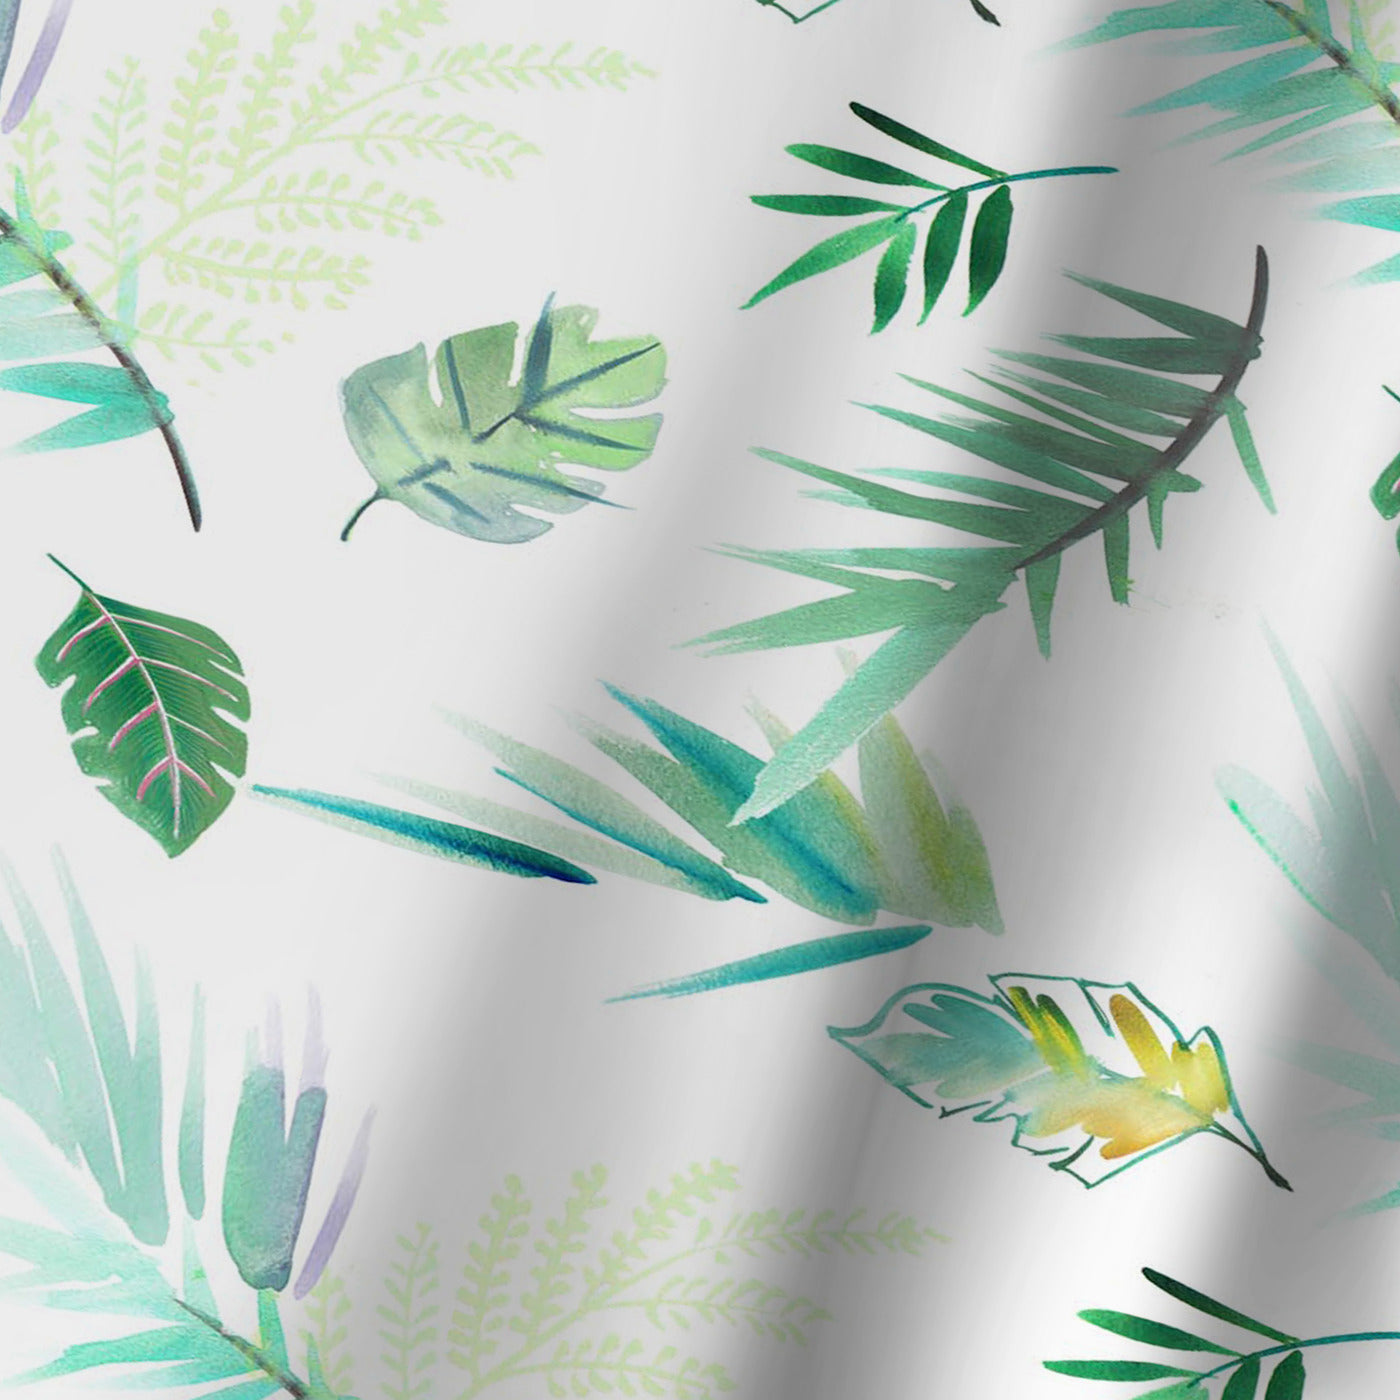 Blackout Curtain Single Panel - Tropical Pattern 2 by Victoria Nelson - Blackout Curtains - Americanflat